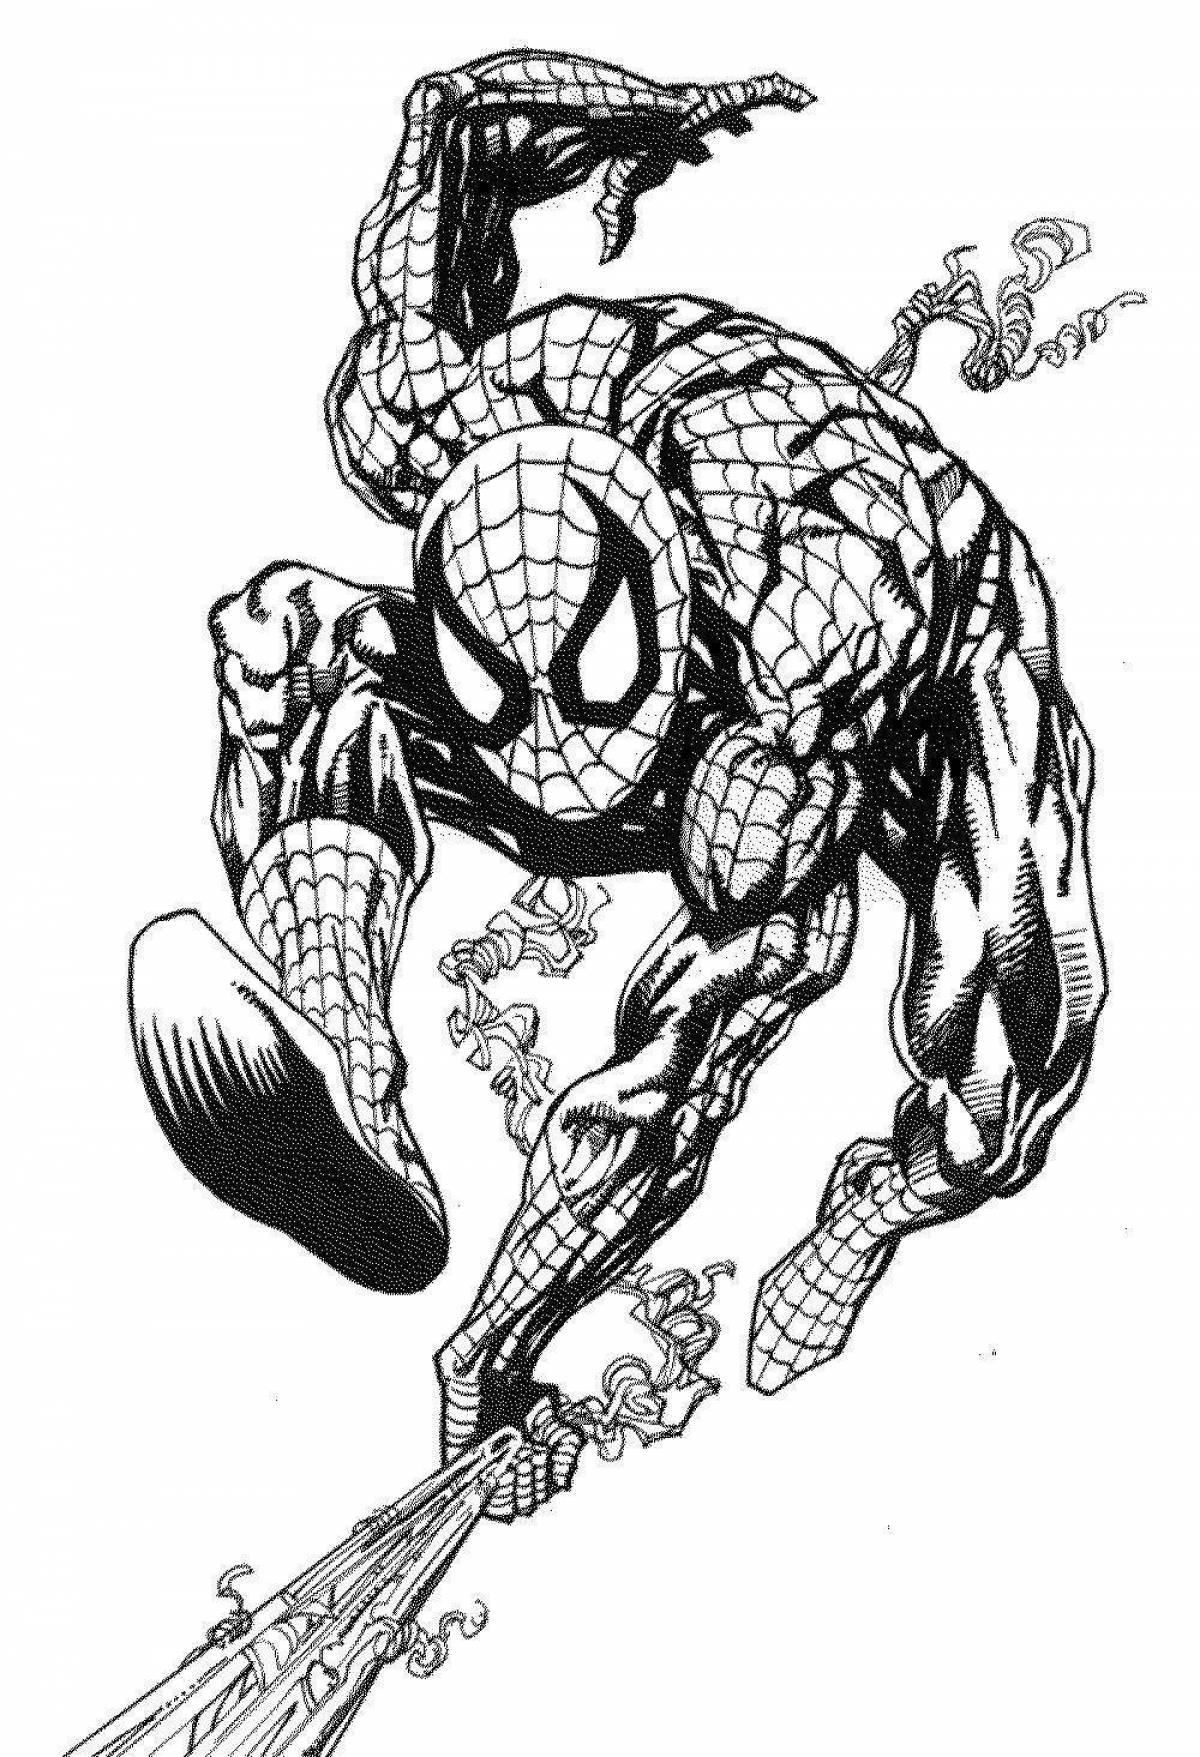 Exciting zombie spiderman coloring book